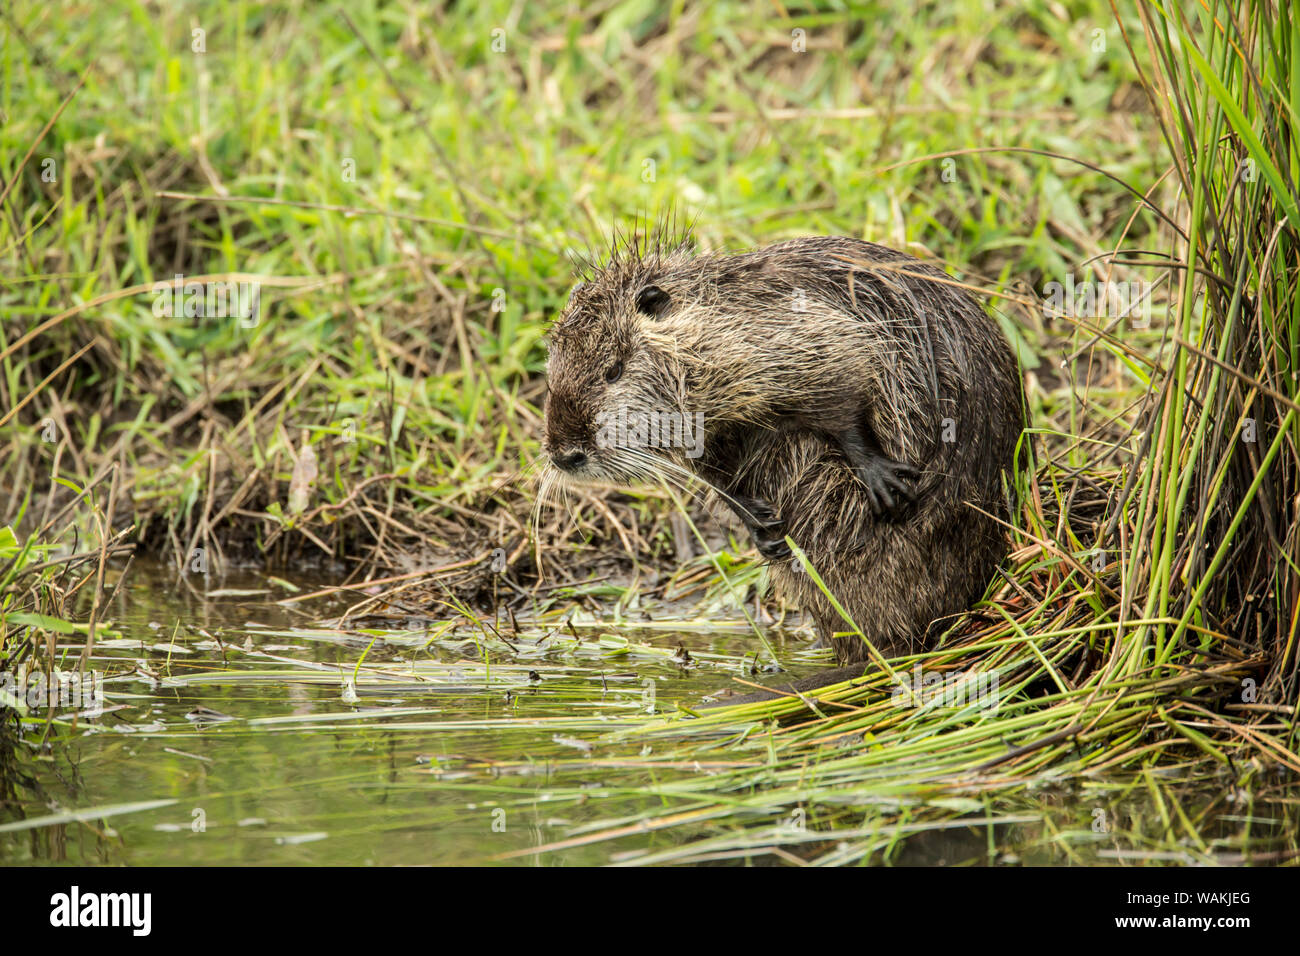 Ridgefield, Washington State, USA. Nutria scratching in Ridgefield National Wildlife Refuge. Coypu, also known as the river rat or nutria, is a large, omnivorous, semi-aquatic rodent. Stock Photo